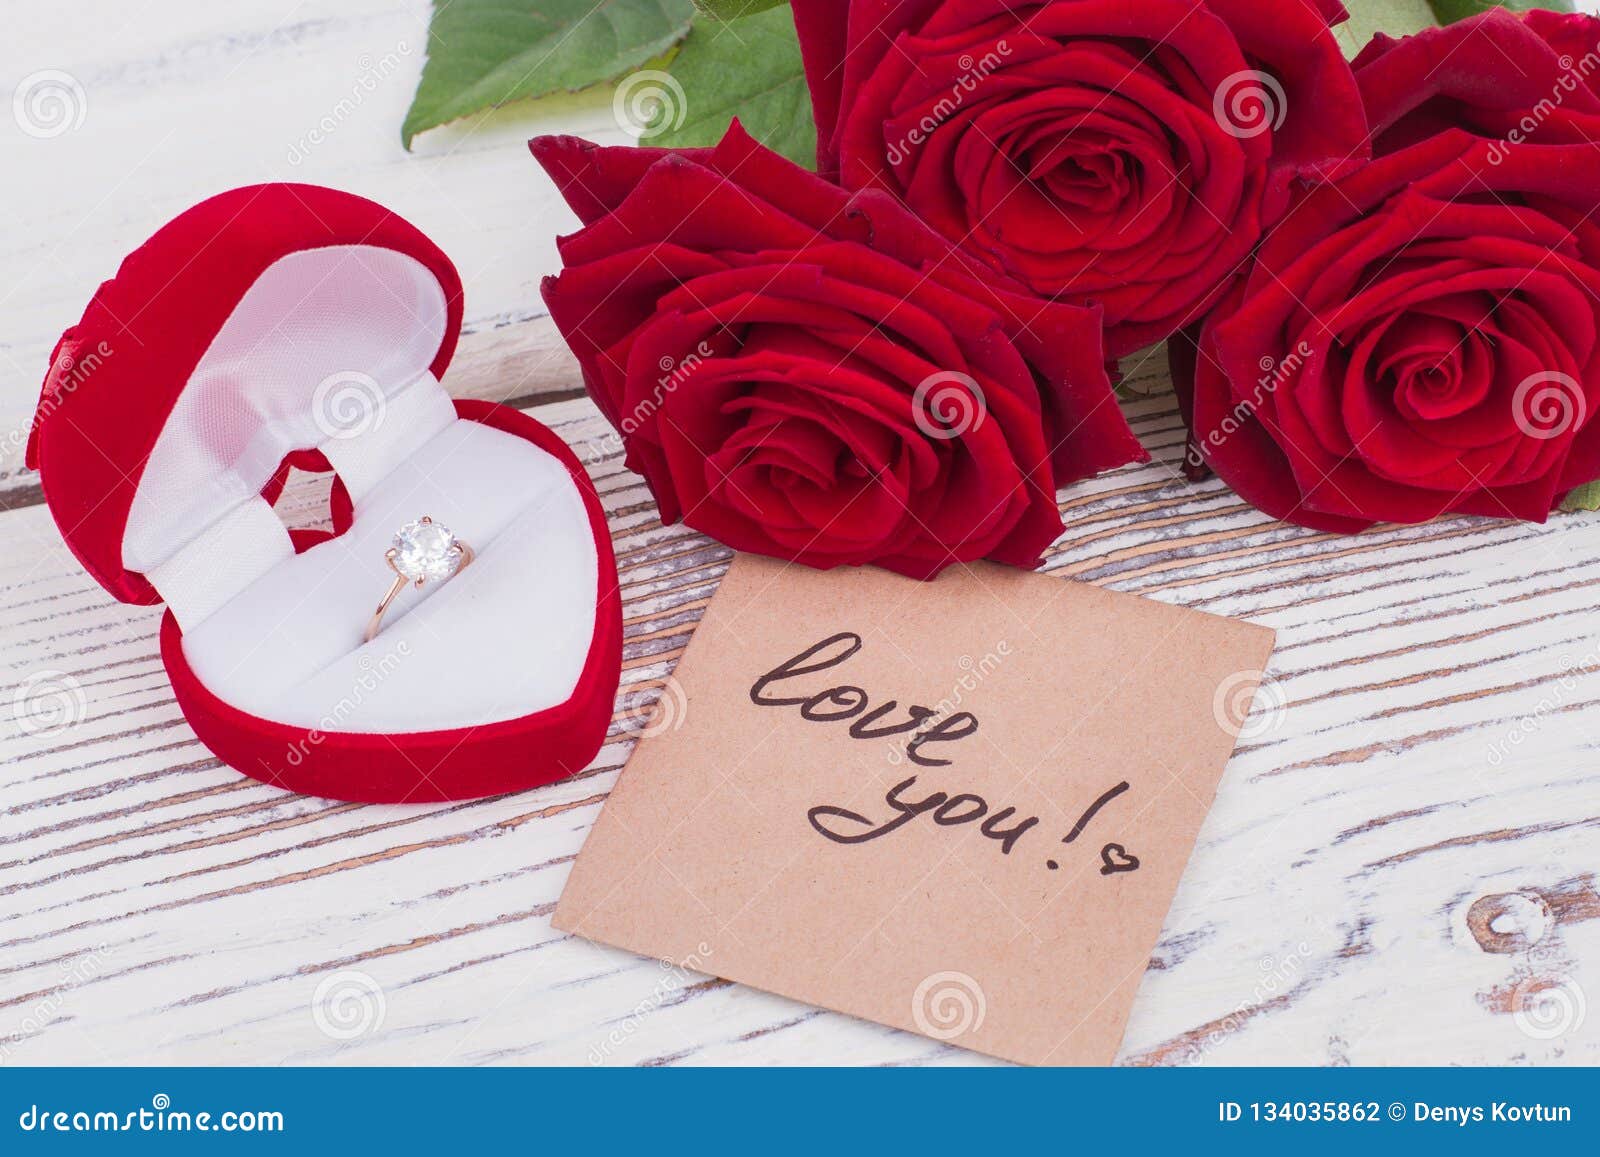 Roses, Diamond Ring and Love Message. Stock Photo - Image of happy ...